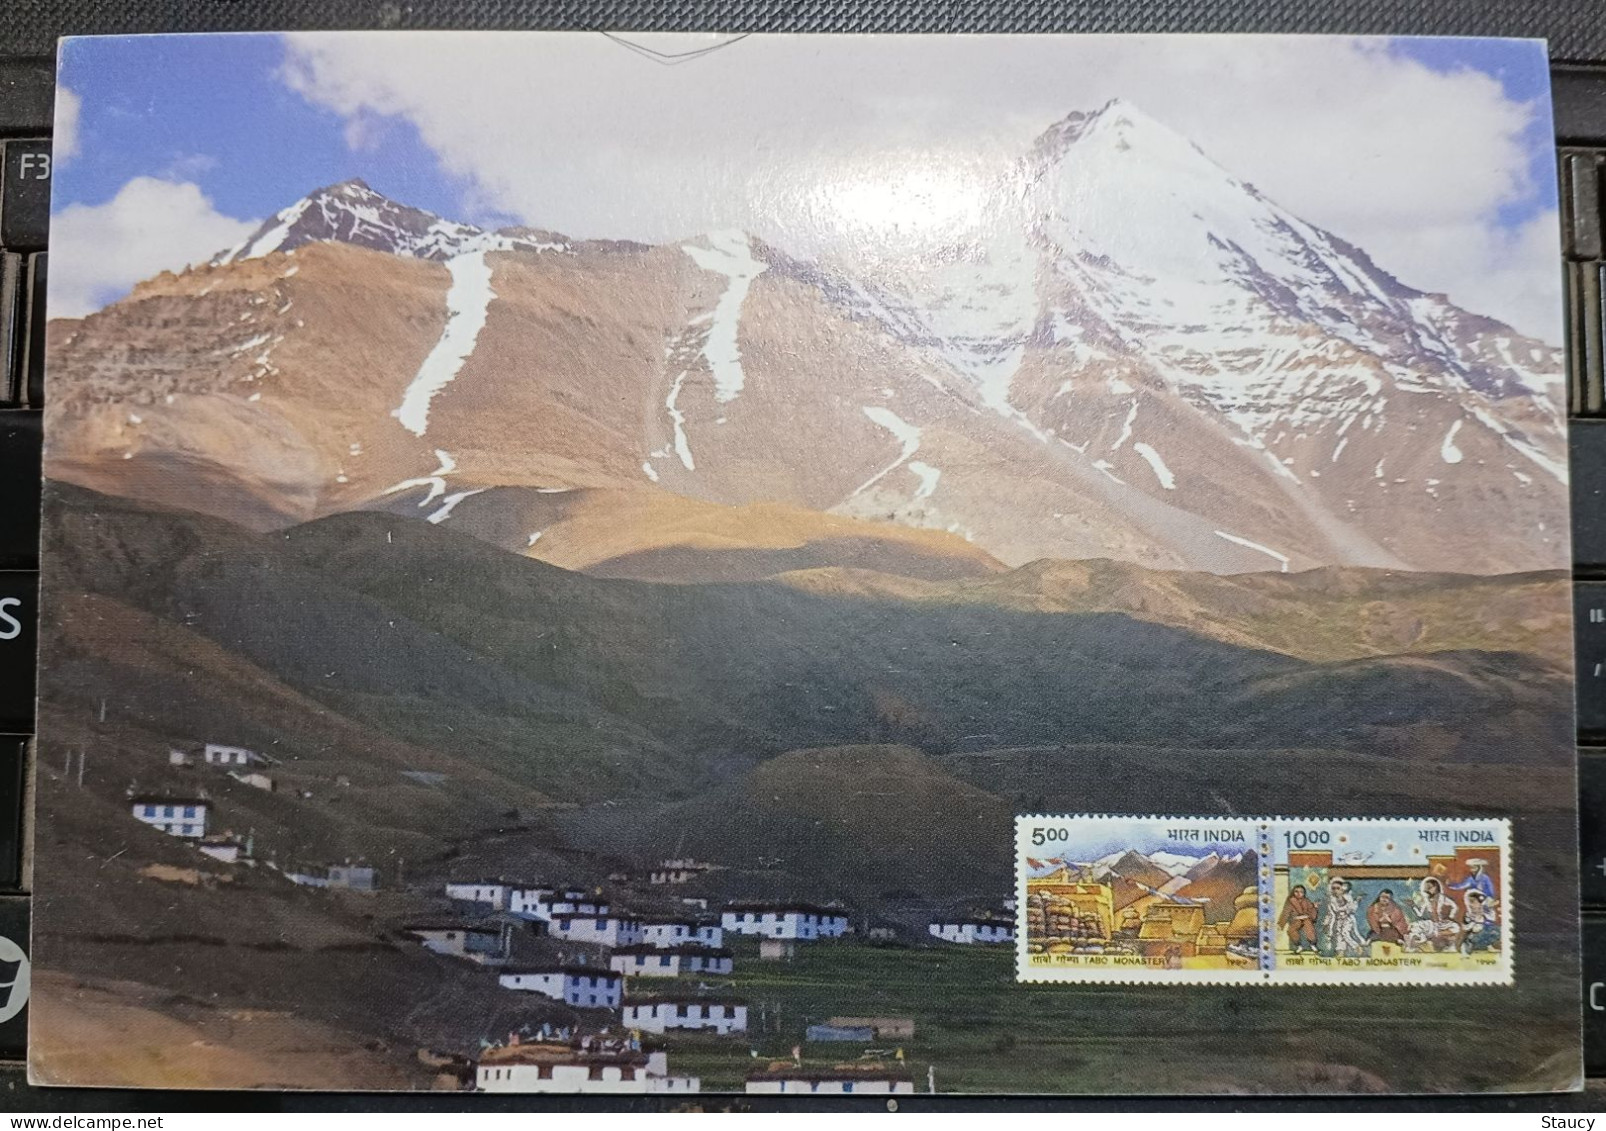 India 2007 Langza Spiti Valley Himanchal Pradesh India Post Picture Post Card As Per Scan - Buddhism